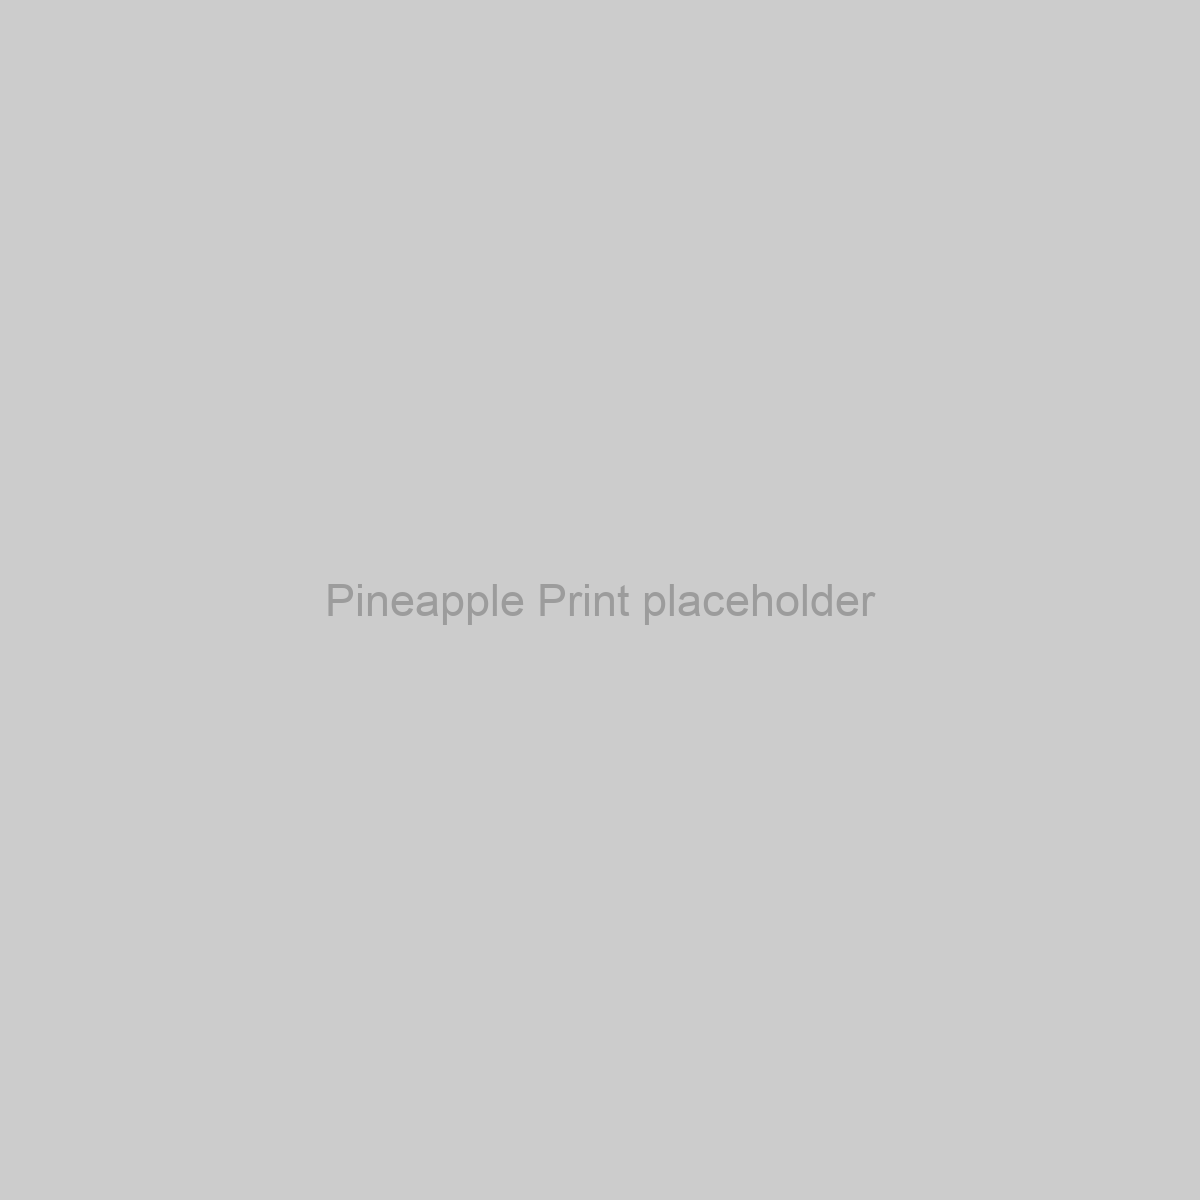 Pineapple Print Placeholder Image